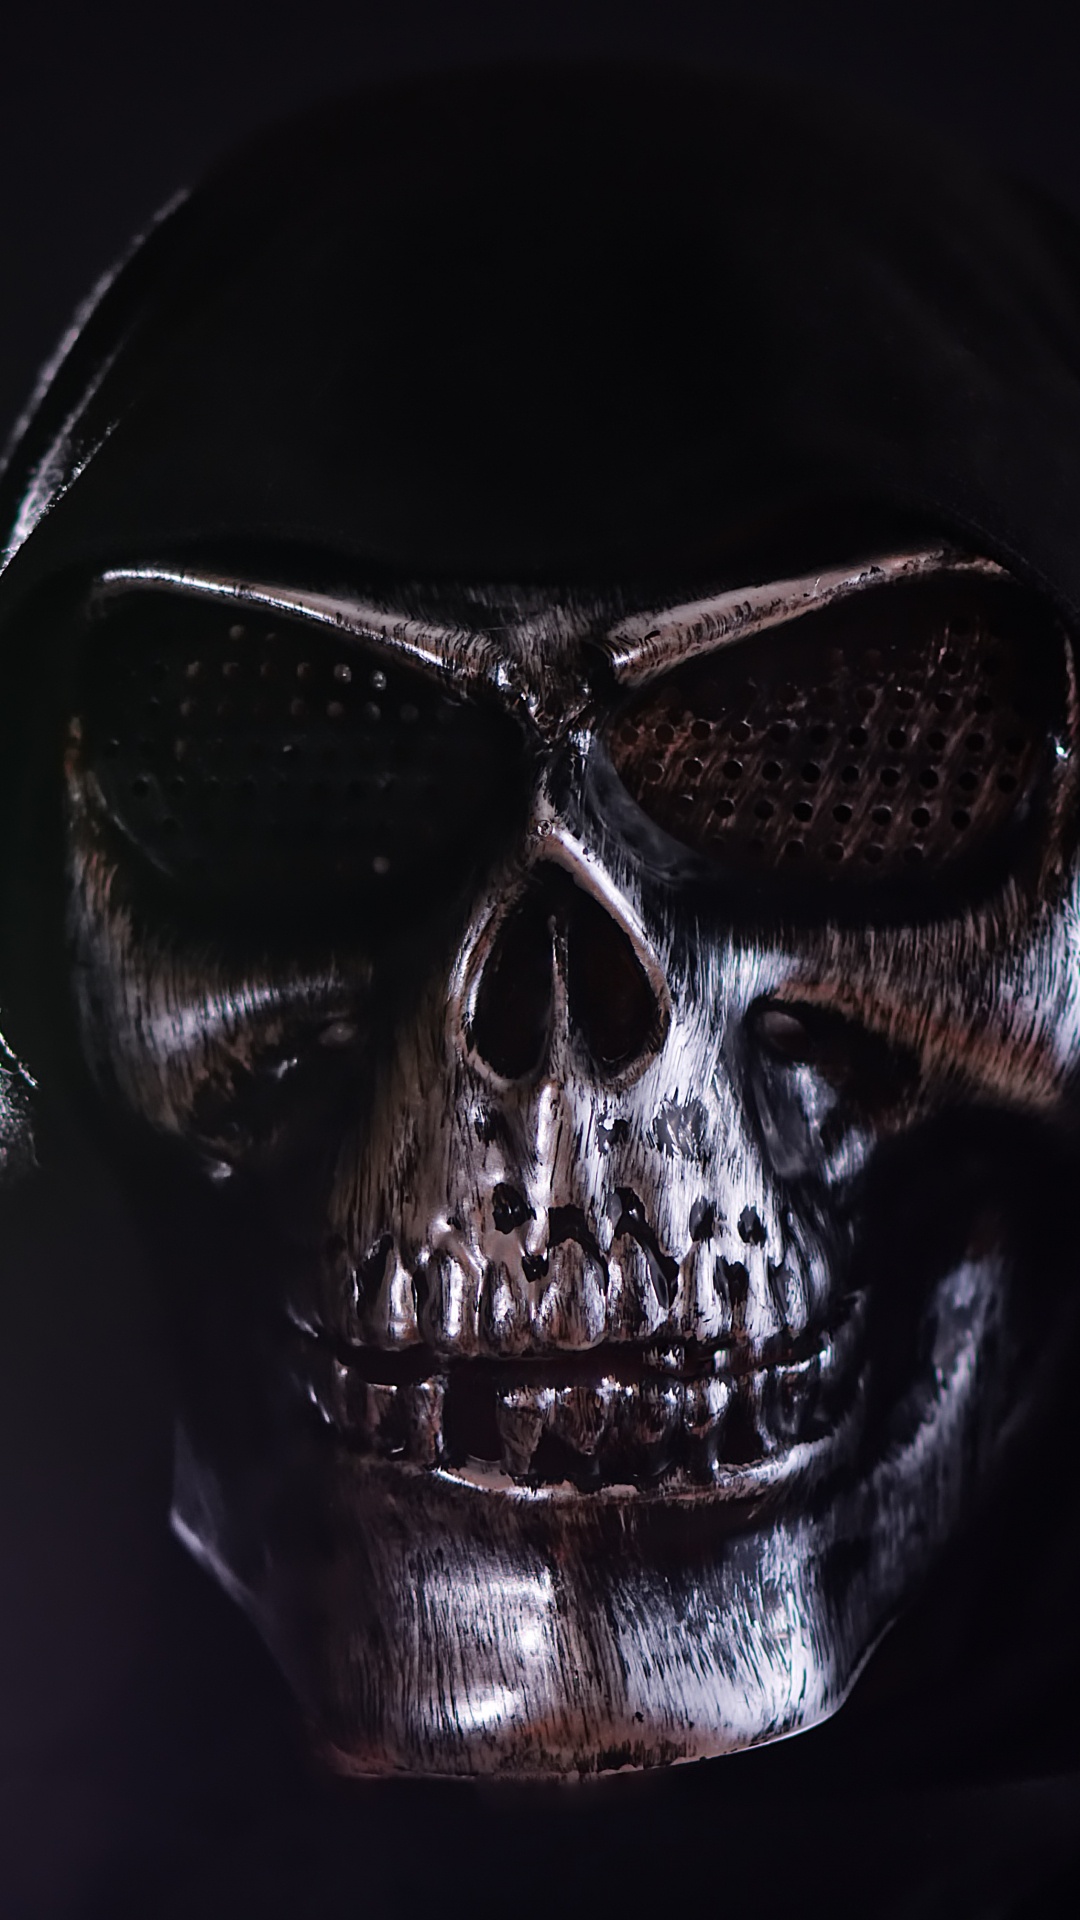 Black and Silver Skull Mask. Wallpaper in 1080x1920 Resolution